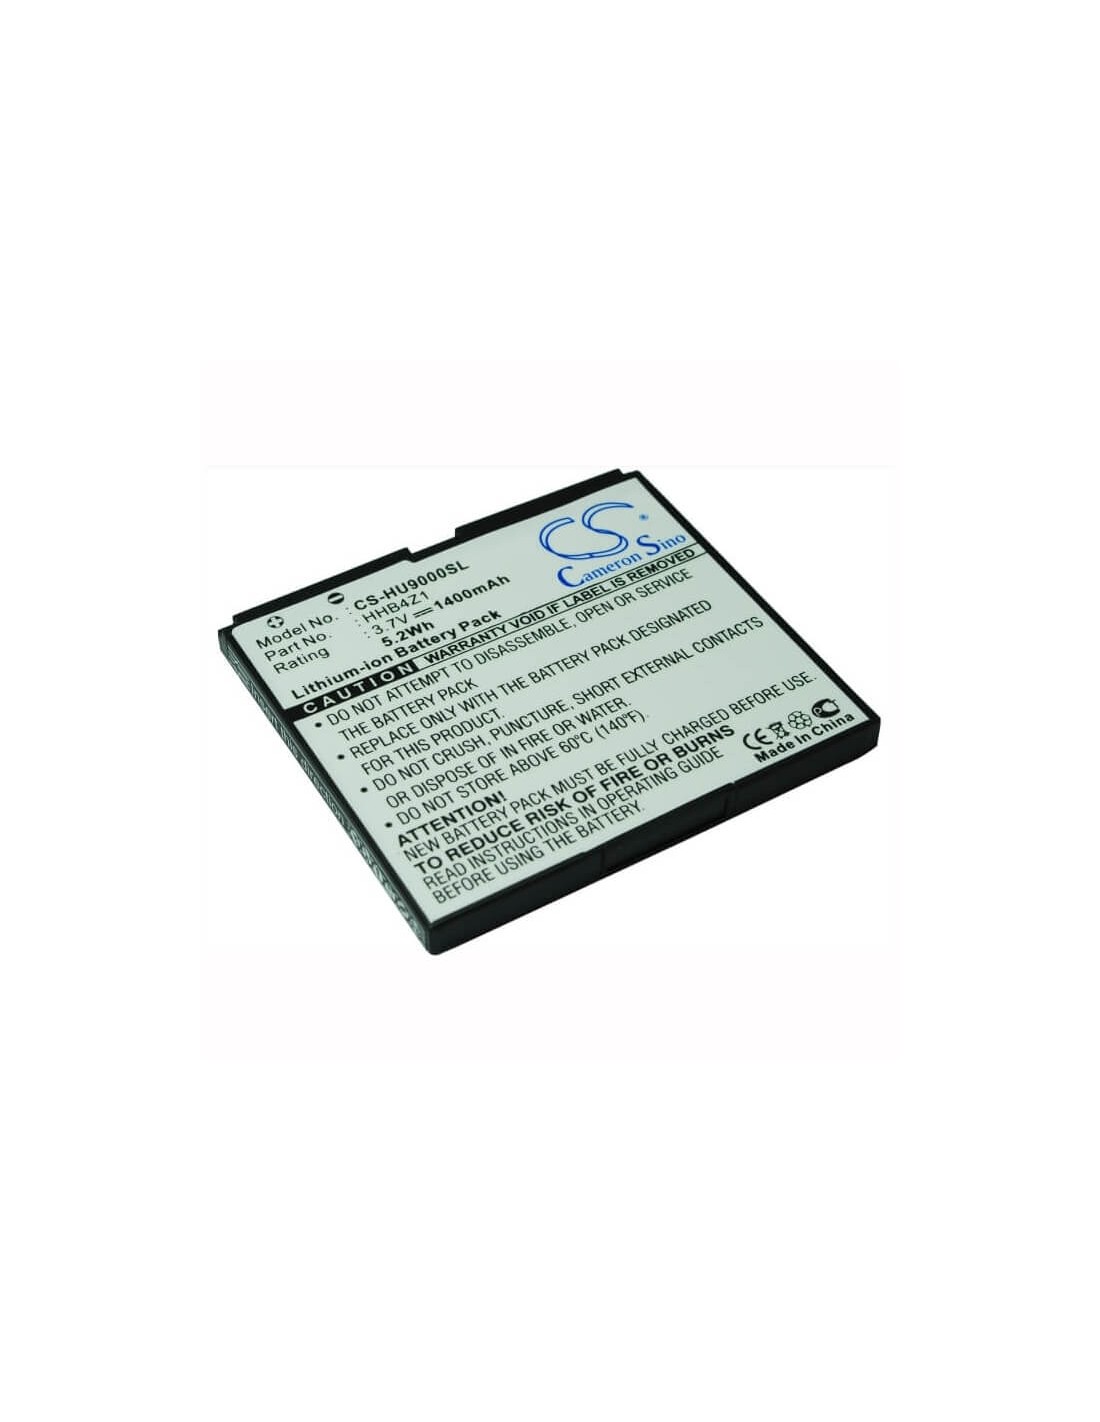 Battery for Huawei ideos X6, ideos U9000, X6 3.7V, 1400mAh - 5.18Wh